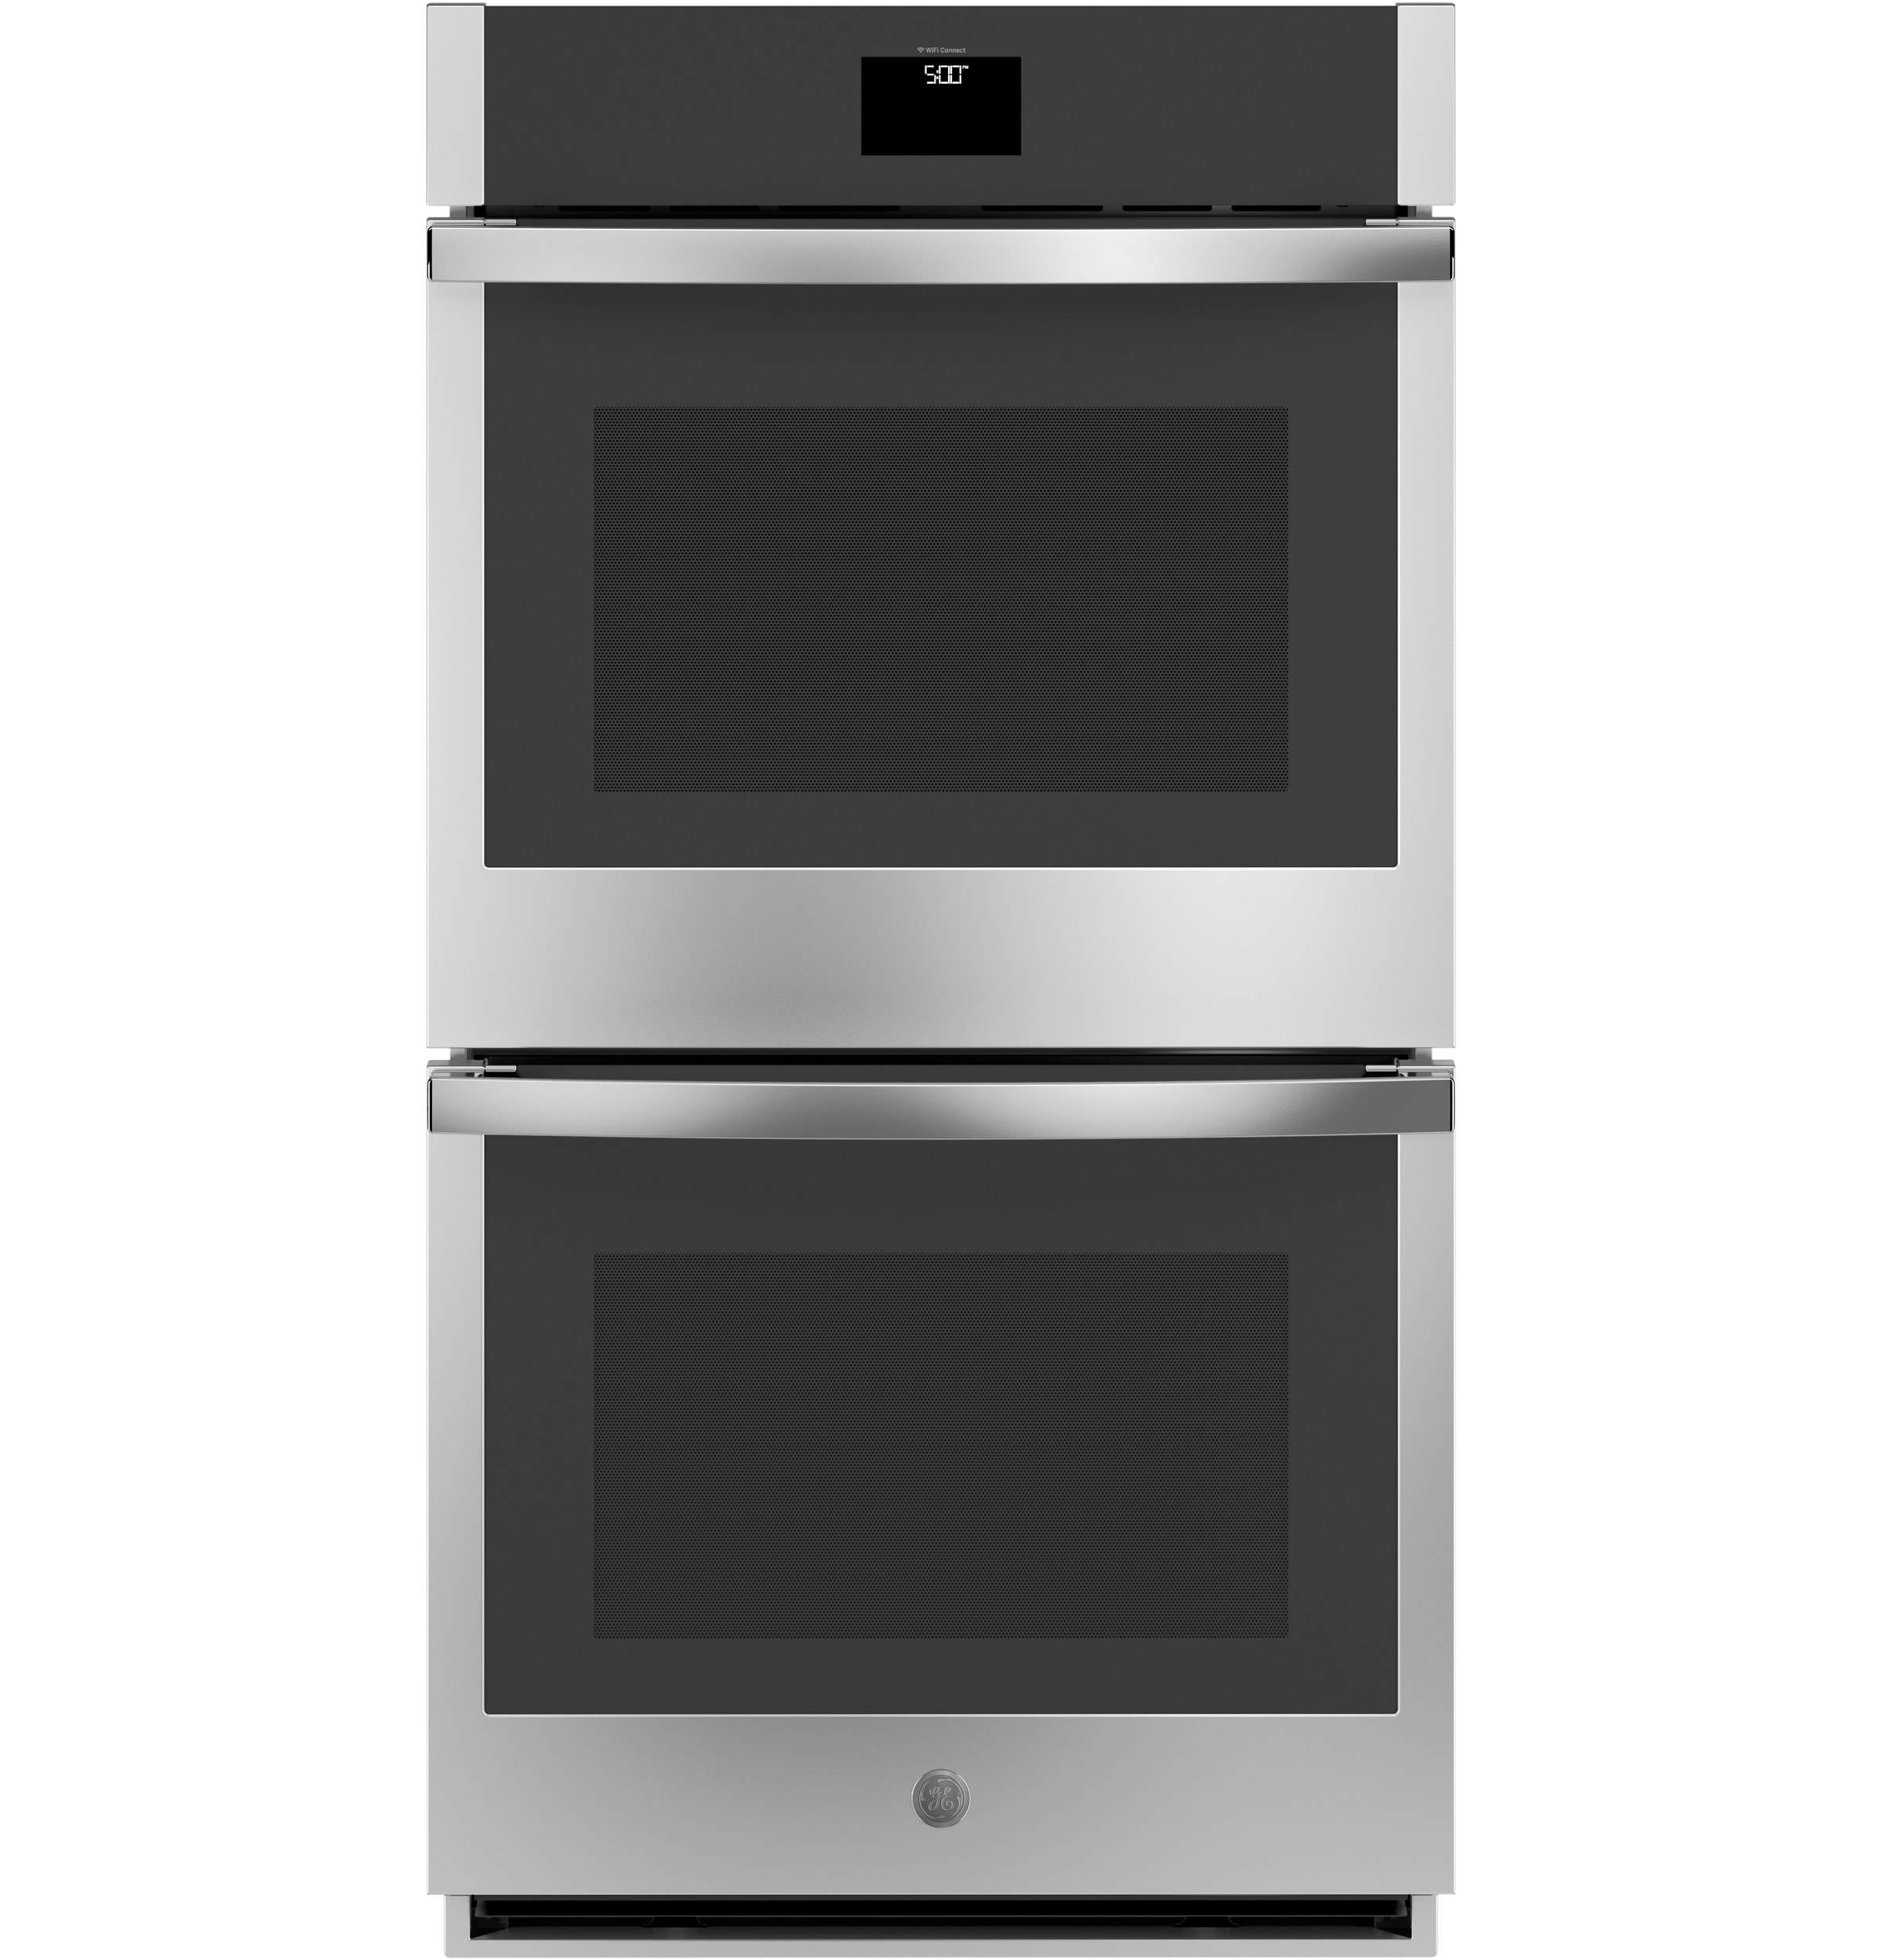 27-inch Double Wall Oven with Air Fry and Basket - 8.6 cu. ft.